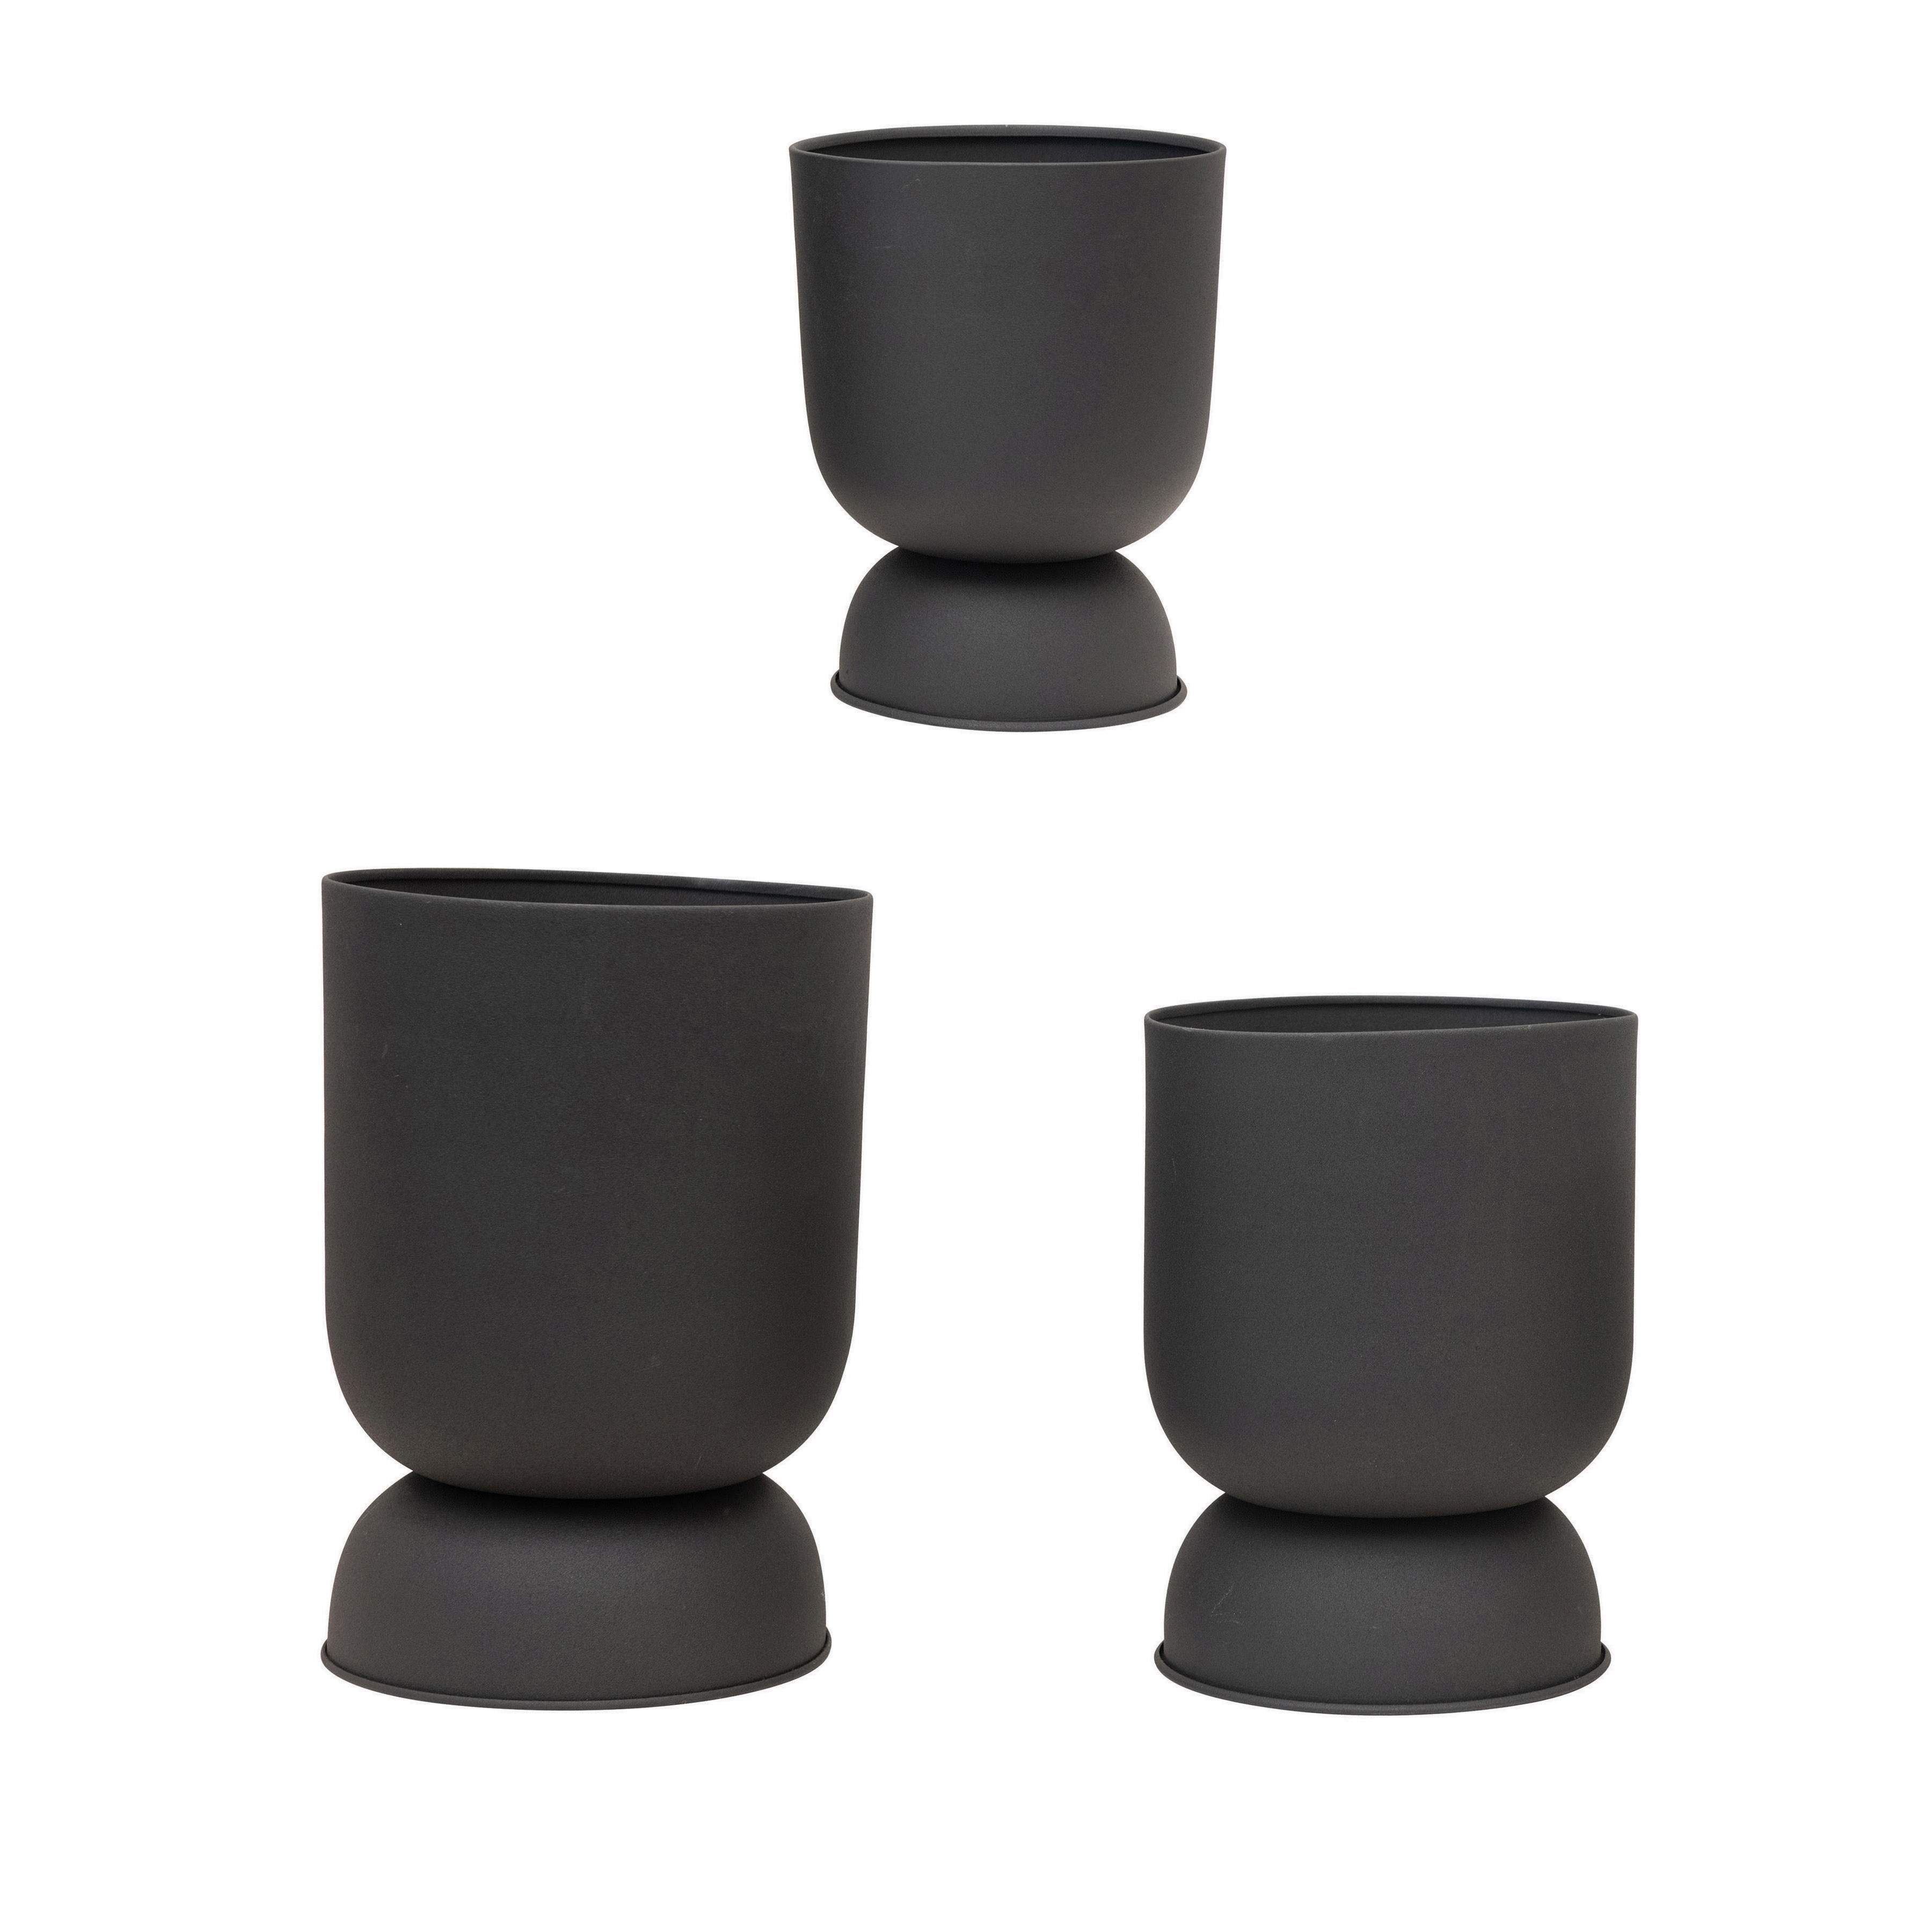 Textured Metal Footed Planters, Black Finish, Set of 3 (Holds 9", 8" & 7" Pots) - Image 0